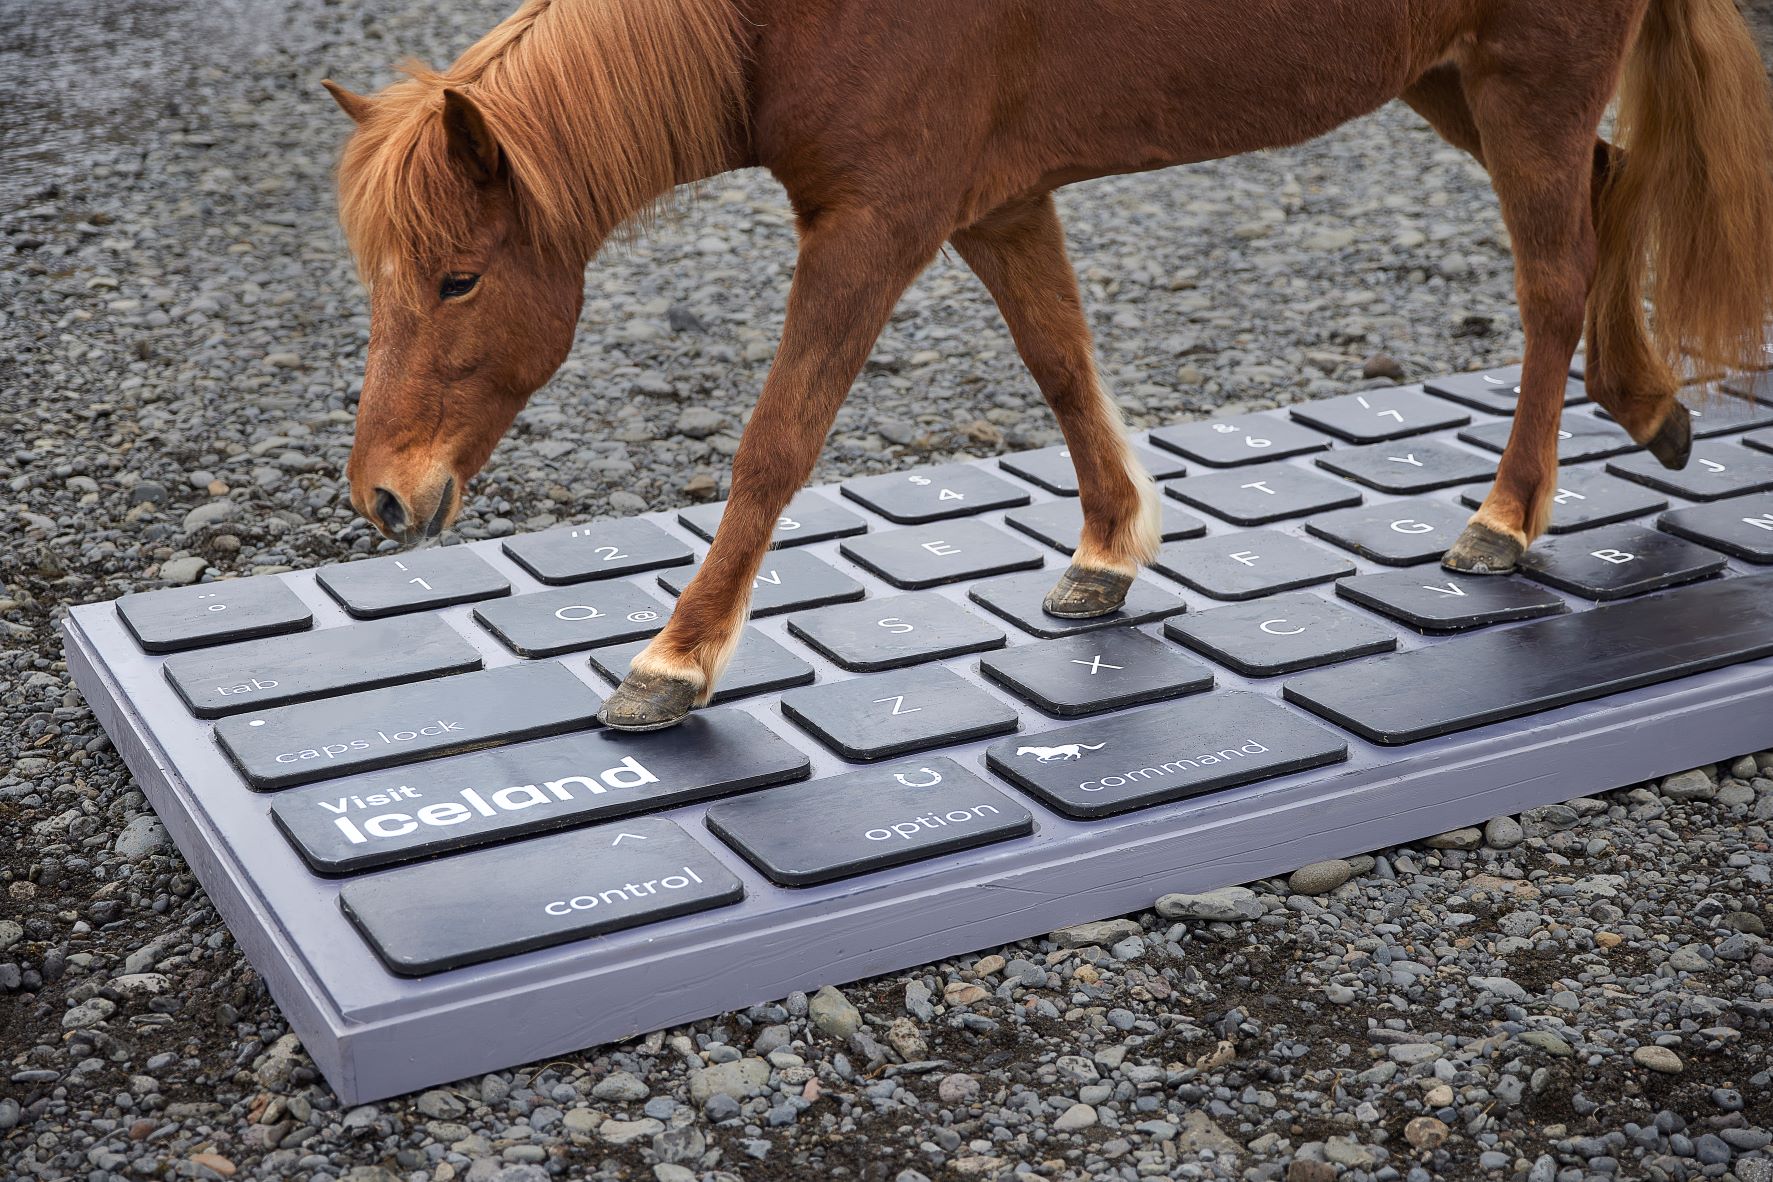 Iceland has trotted out a service that lets horses reply to work emails when you're on holiday. (Dean Murray/Zenger)